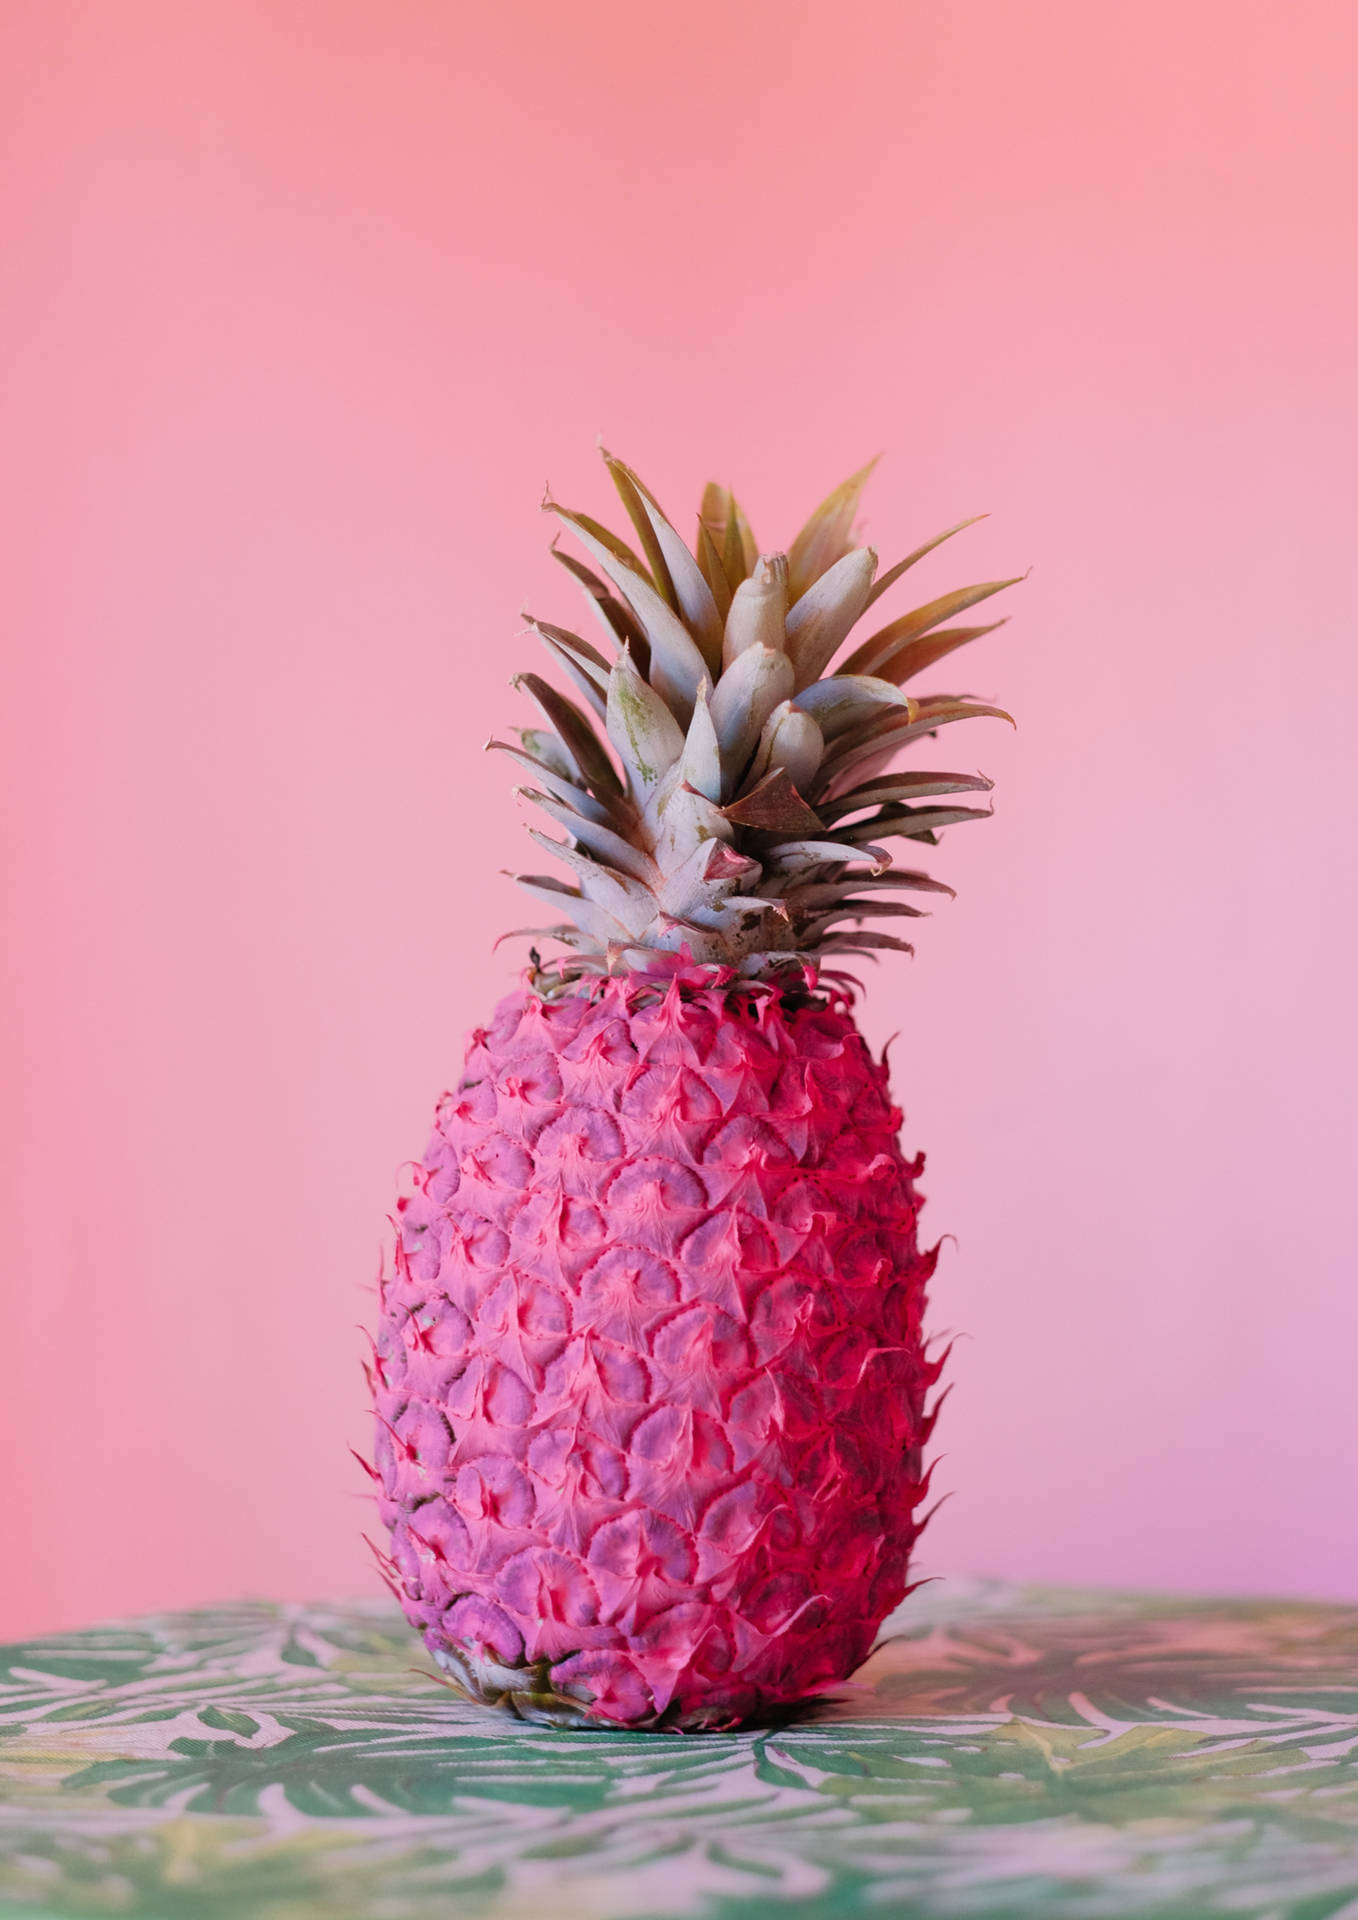 A gorgeous, bright pink pineapple Wallpaper